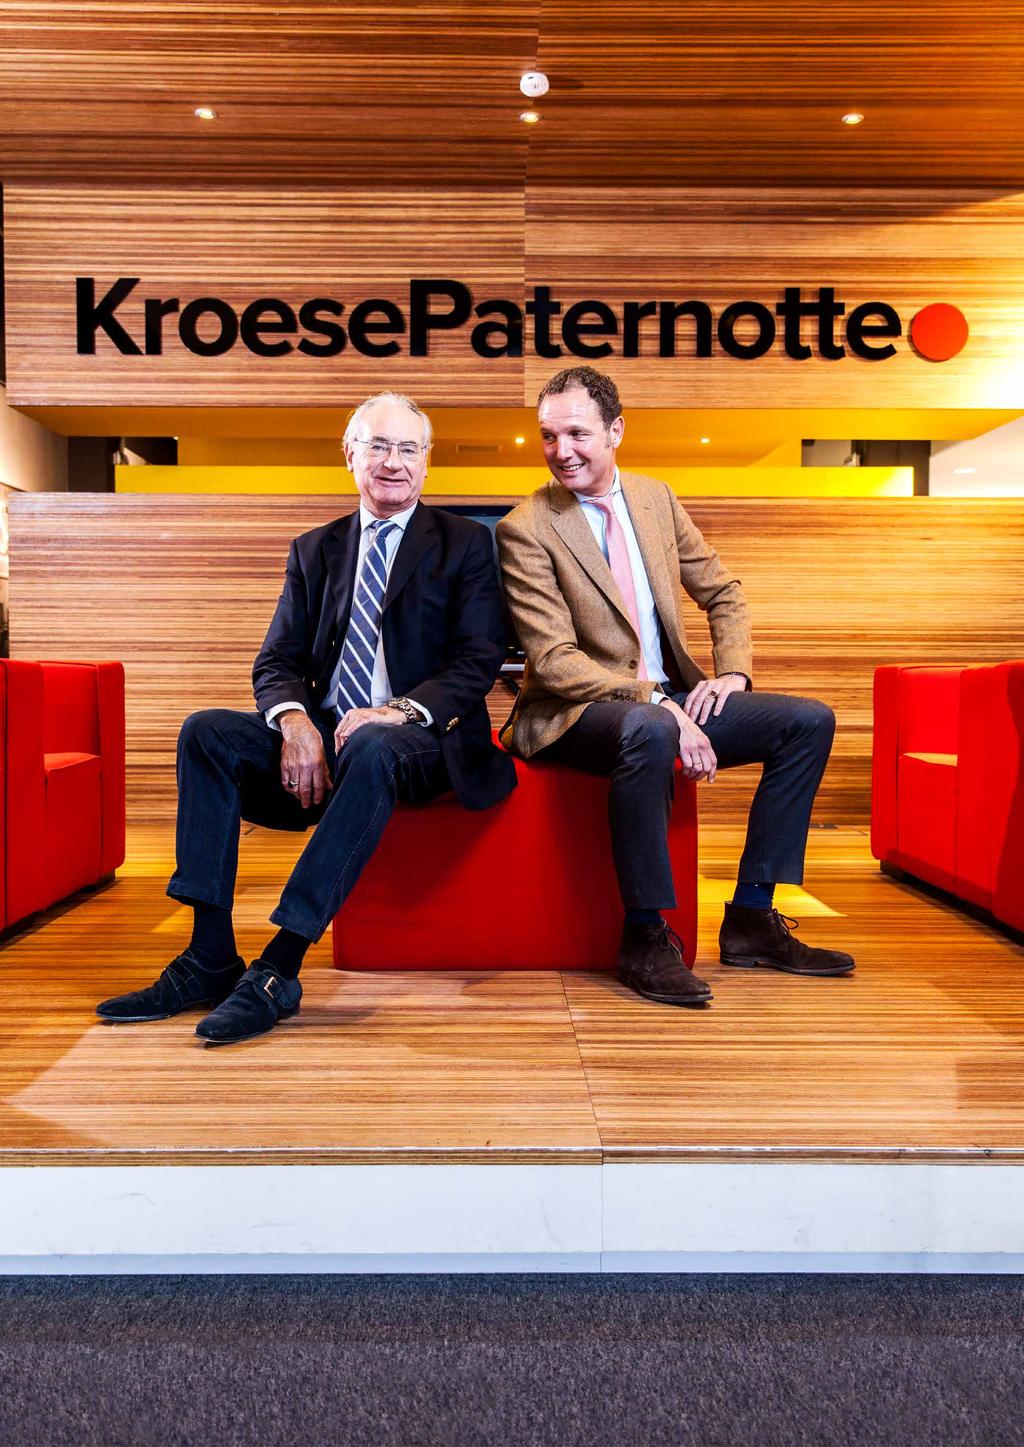 RETAIL PROPERTY Assured of its own abilities and never subject to false modesty, KroesePaternotte. likes to refer to itself as the A1 retail specialist in the Netherlands.